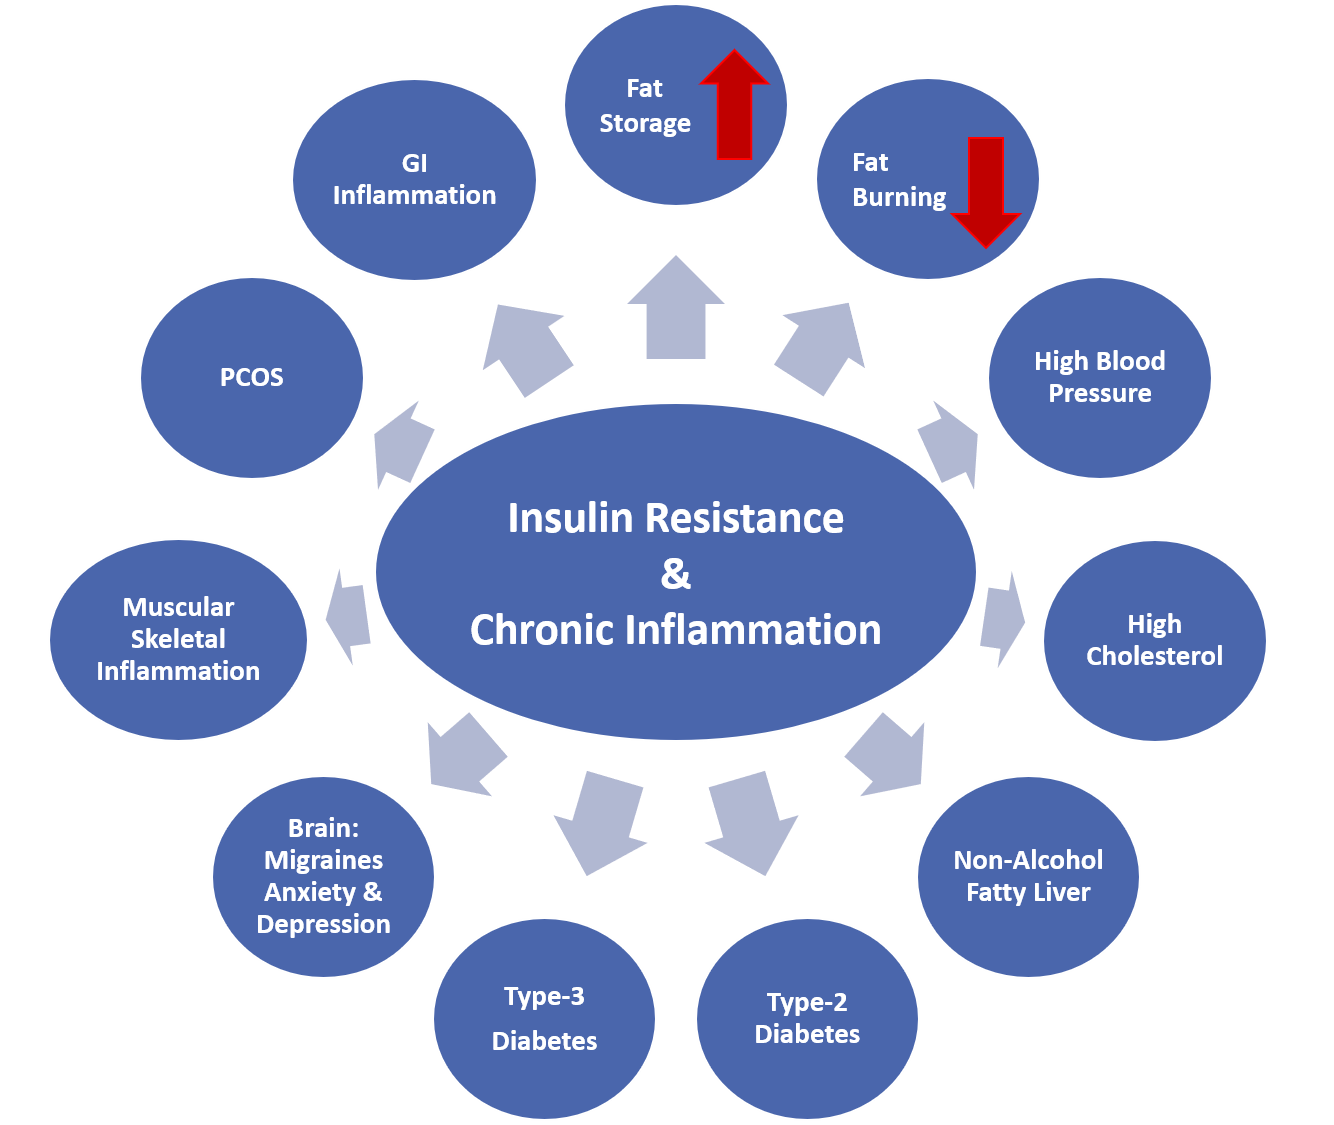 Image shows how Ideal Protein can help reduce risk of disease by addressing insulin resistance.